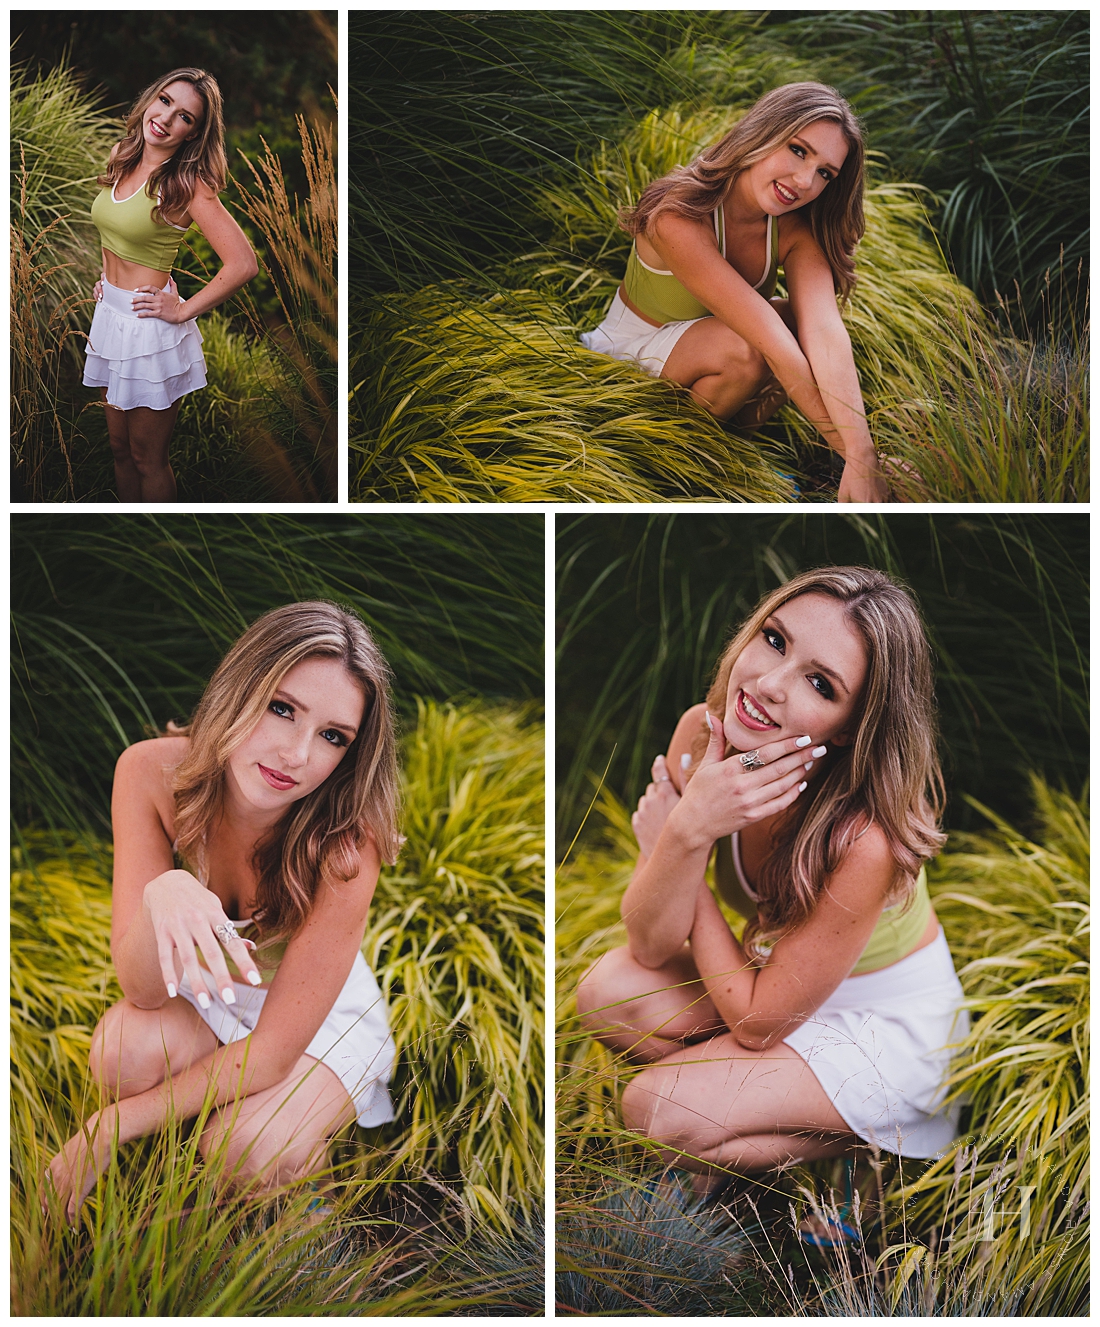 Grassy Outdoor Senior Photos | Olive Halter Top and White Skirt, Senior Pose Ideas | Photographed by the Best Tacoma Senior Photographer Amanda Howse Photography